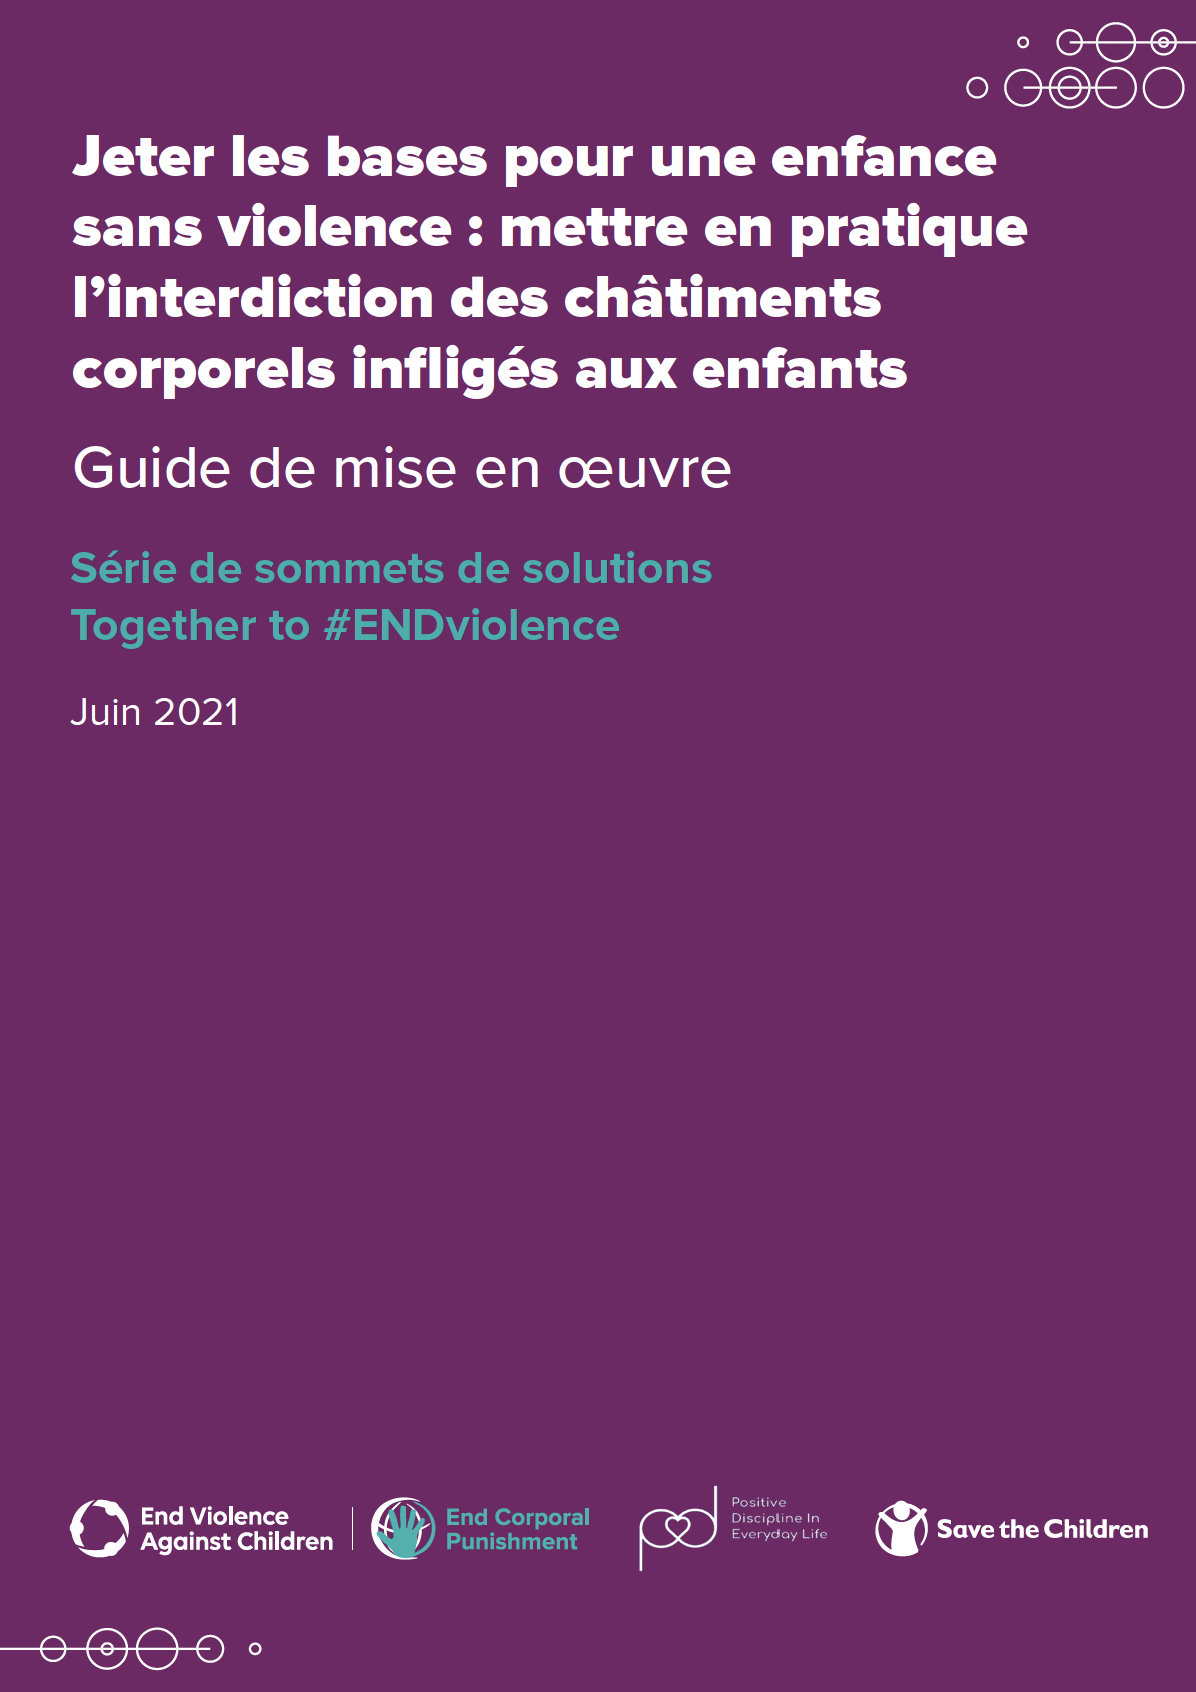 Implementation guidance in French